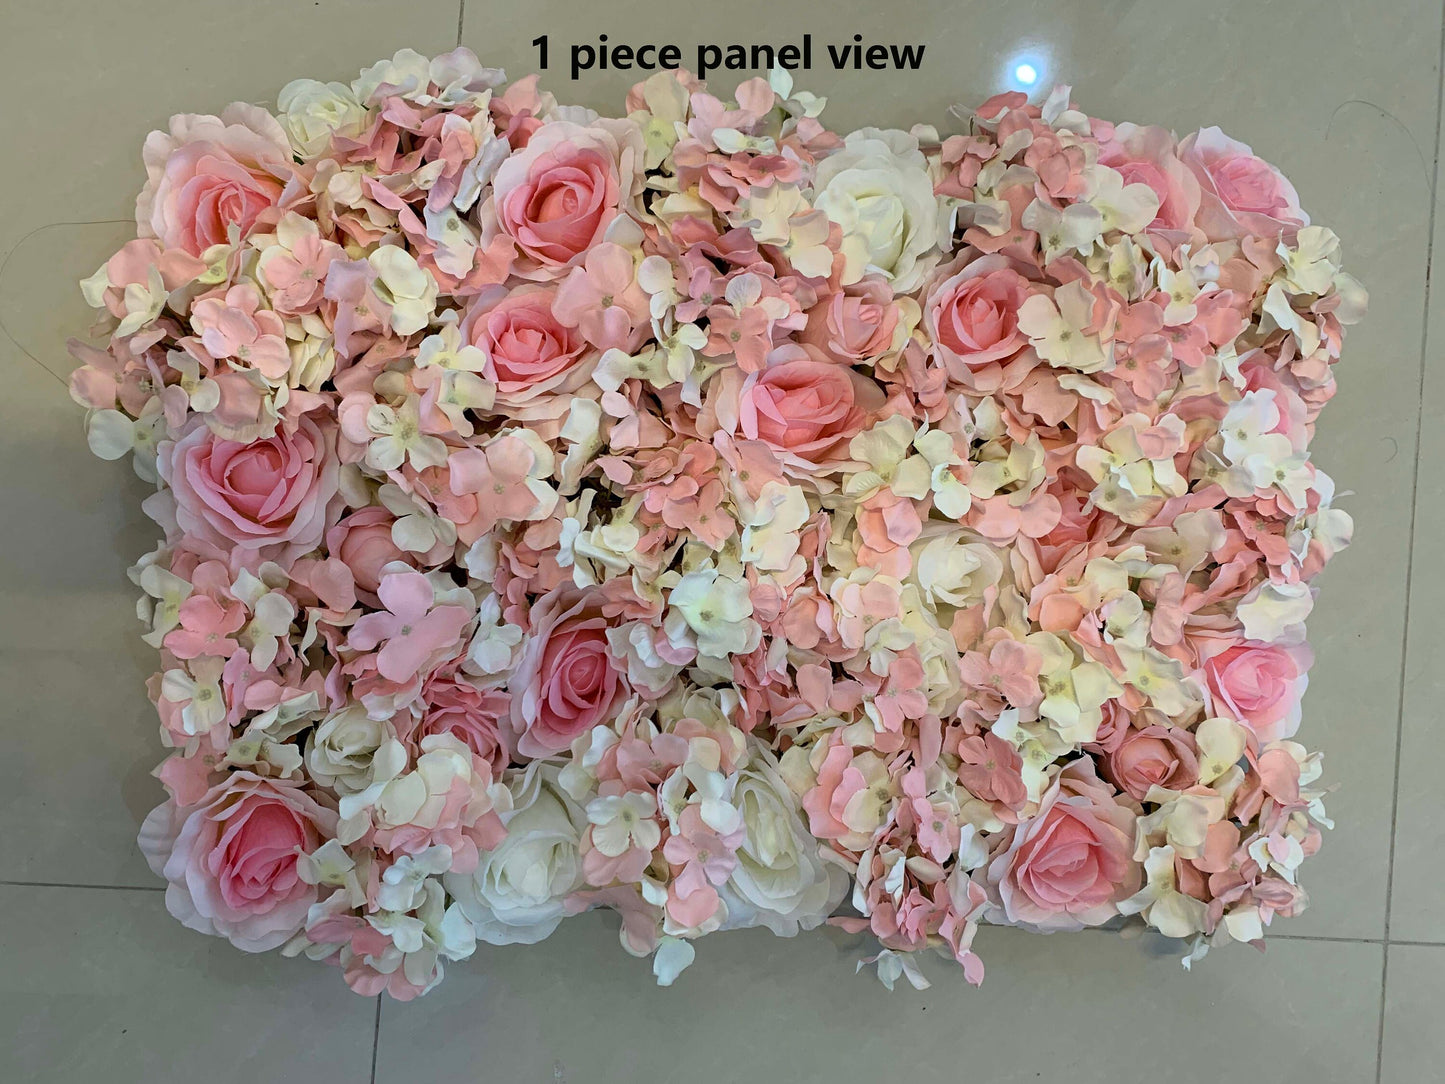 Baby Pink Wedding Flower Wall Rose Hydrangea Wall For Romantic Photography Backdrop Special Event Decor Fake Floral Panels 40*60cm